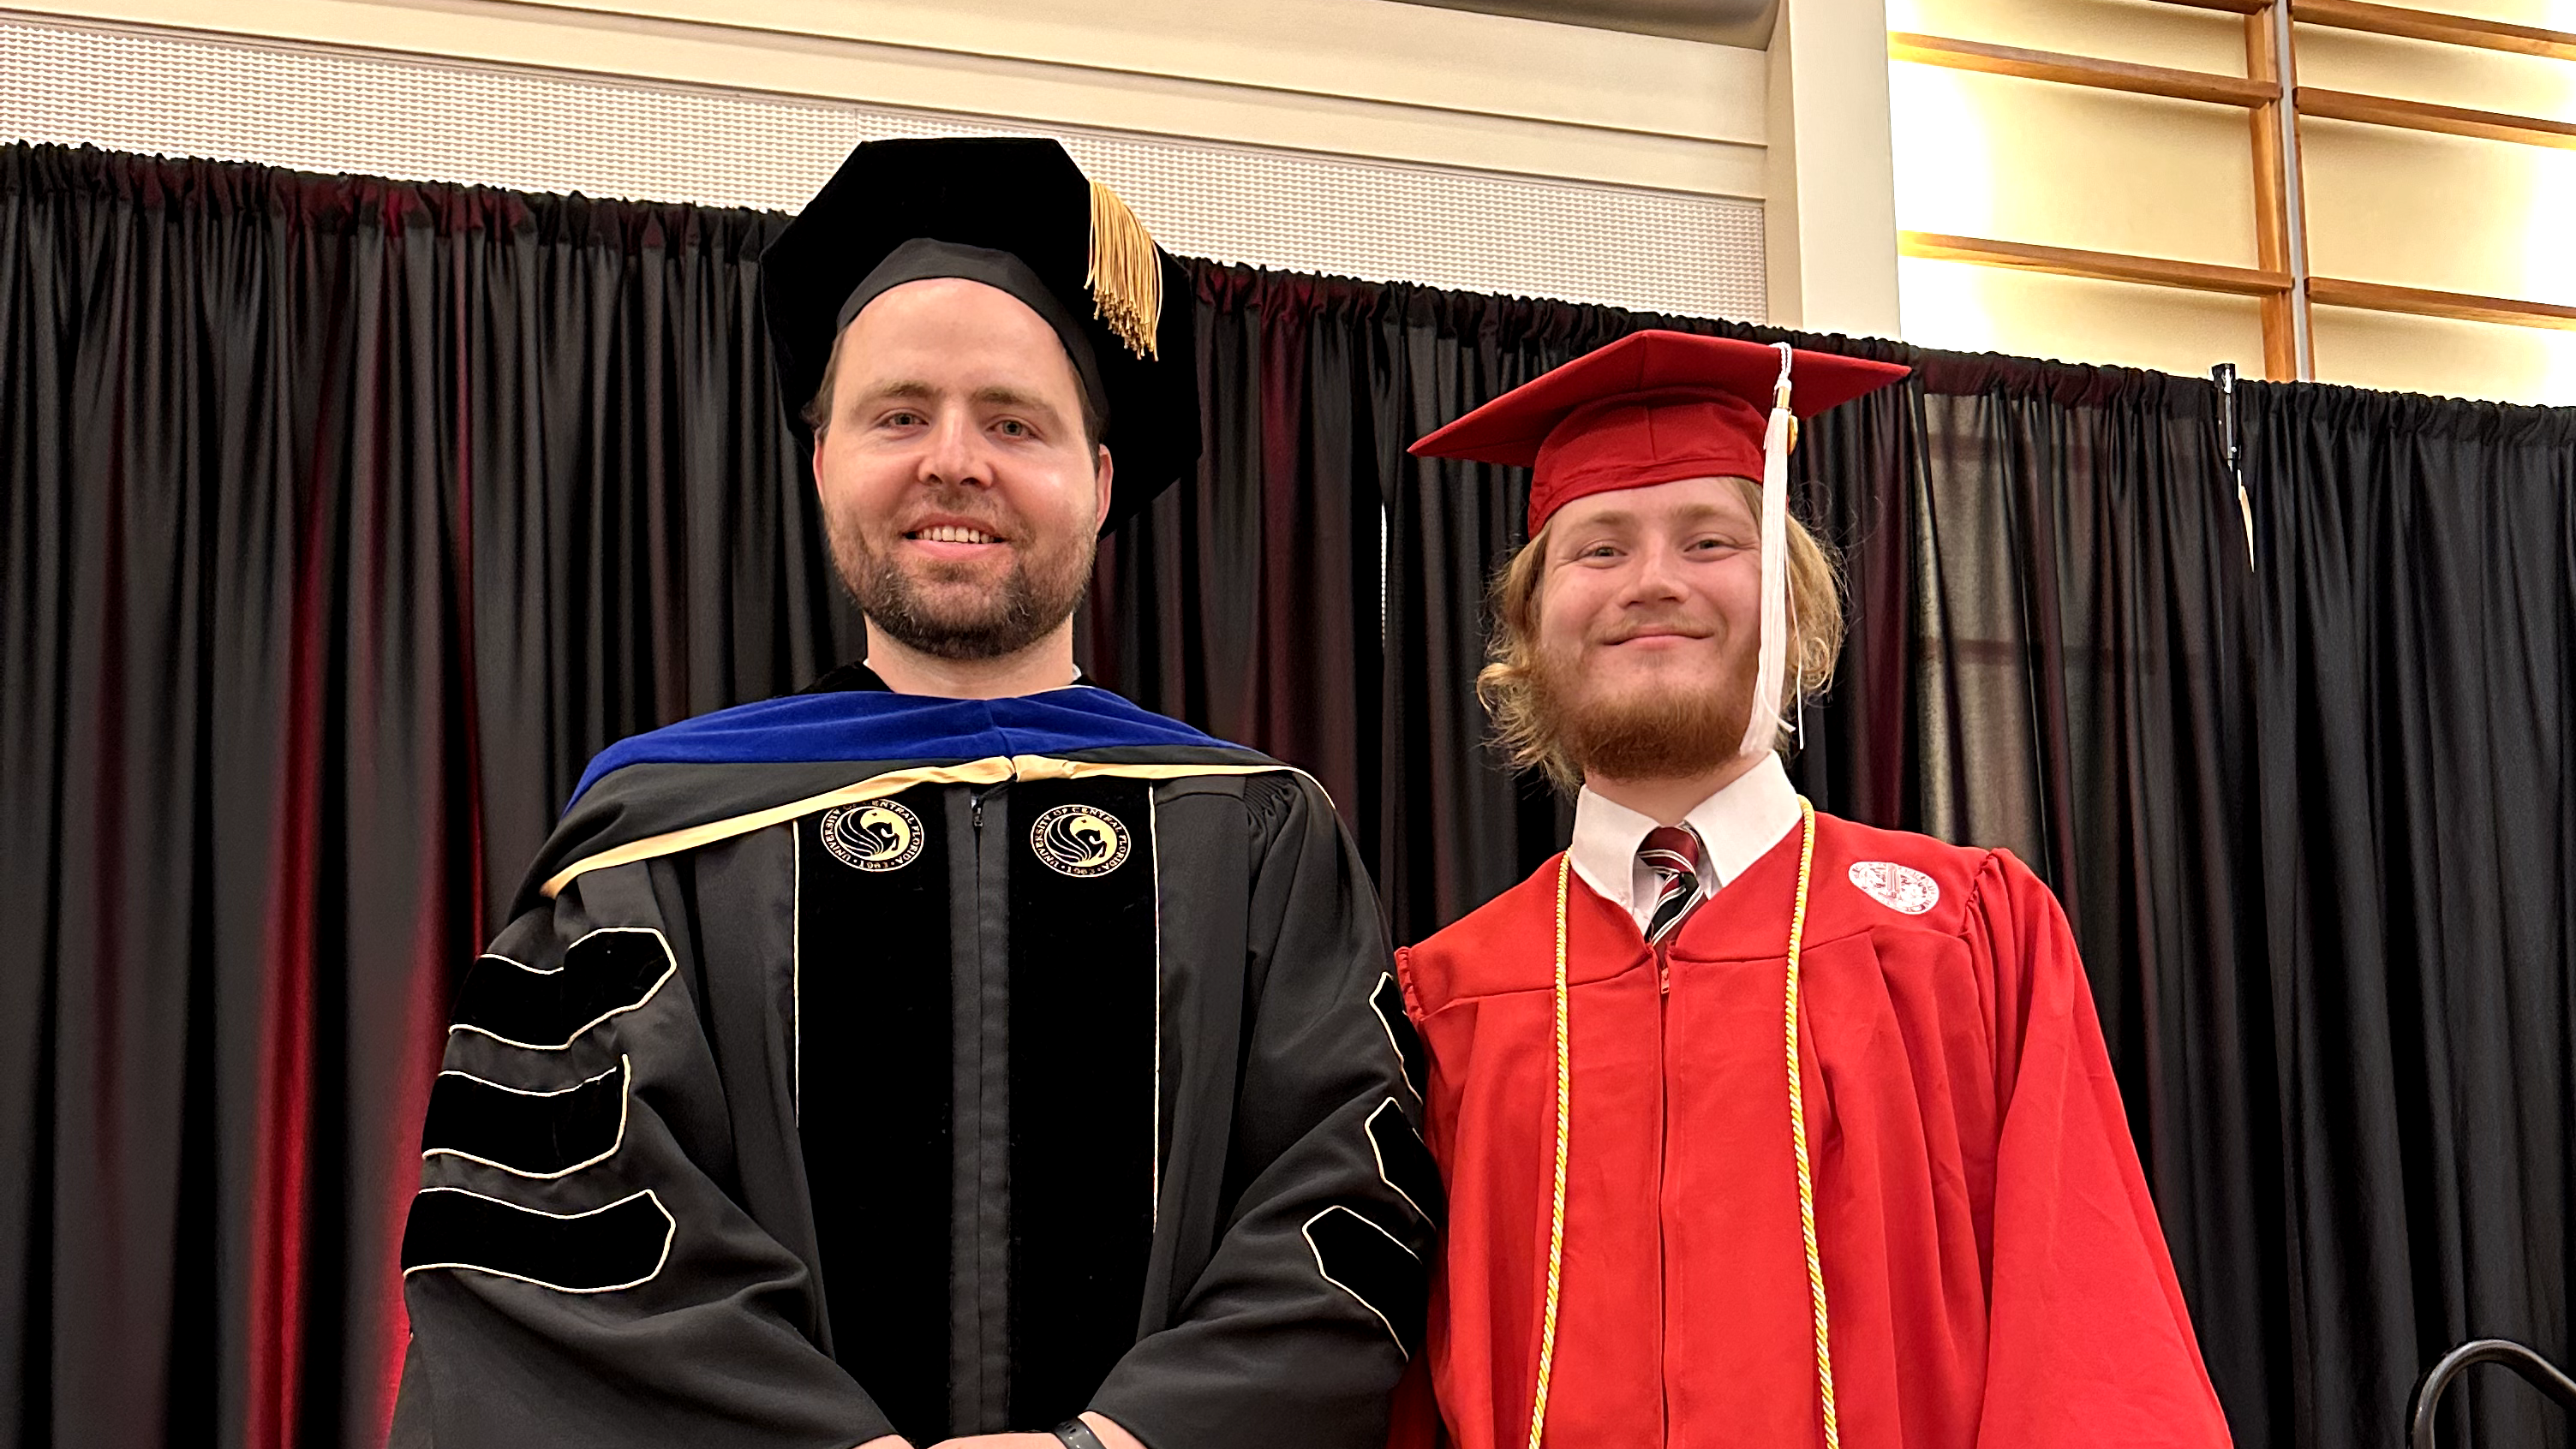 Dr. Zlatin Mitkov and new graduate Justin Thorpe at commencement